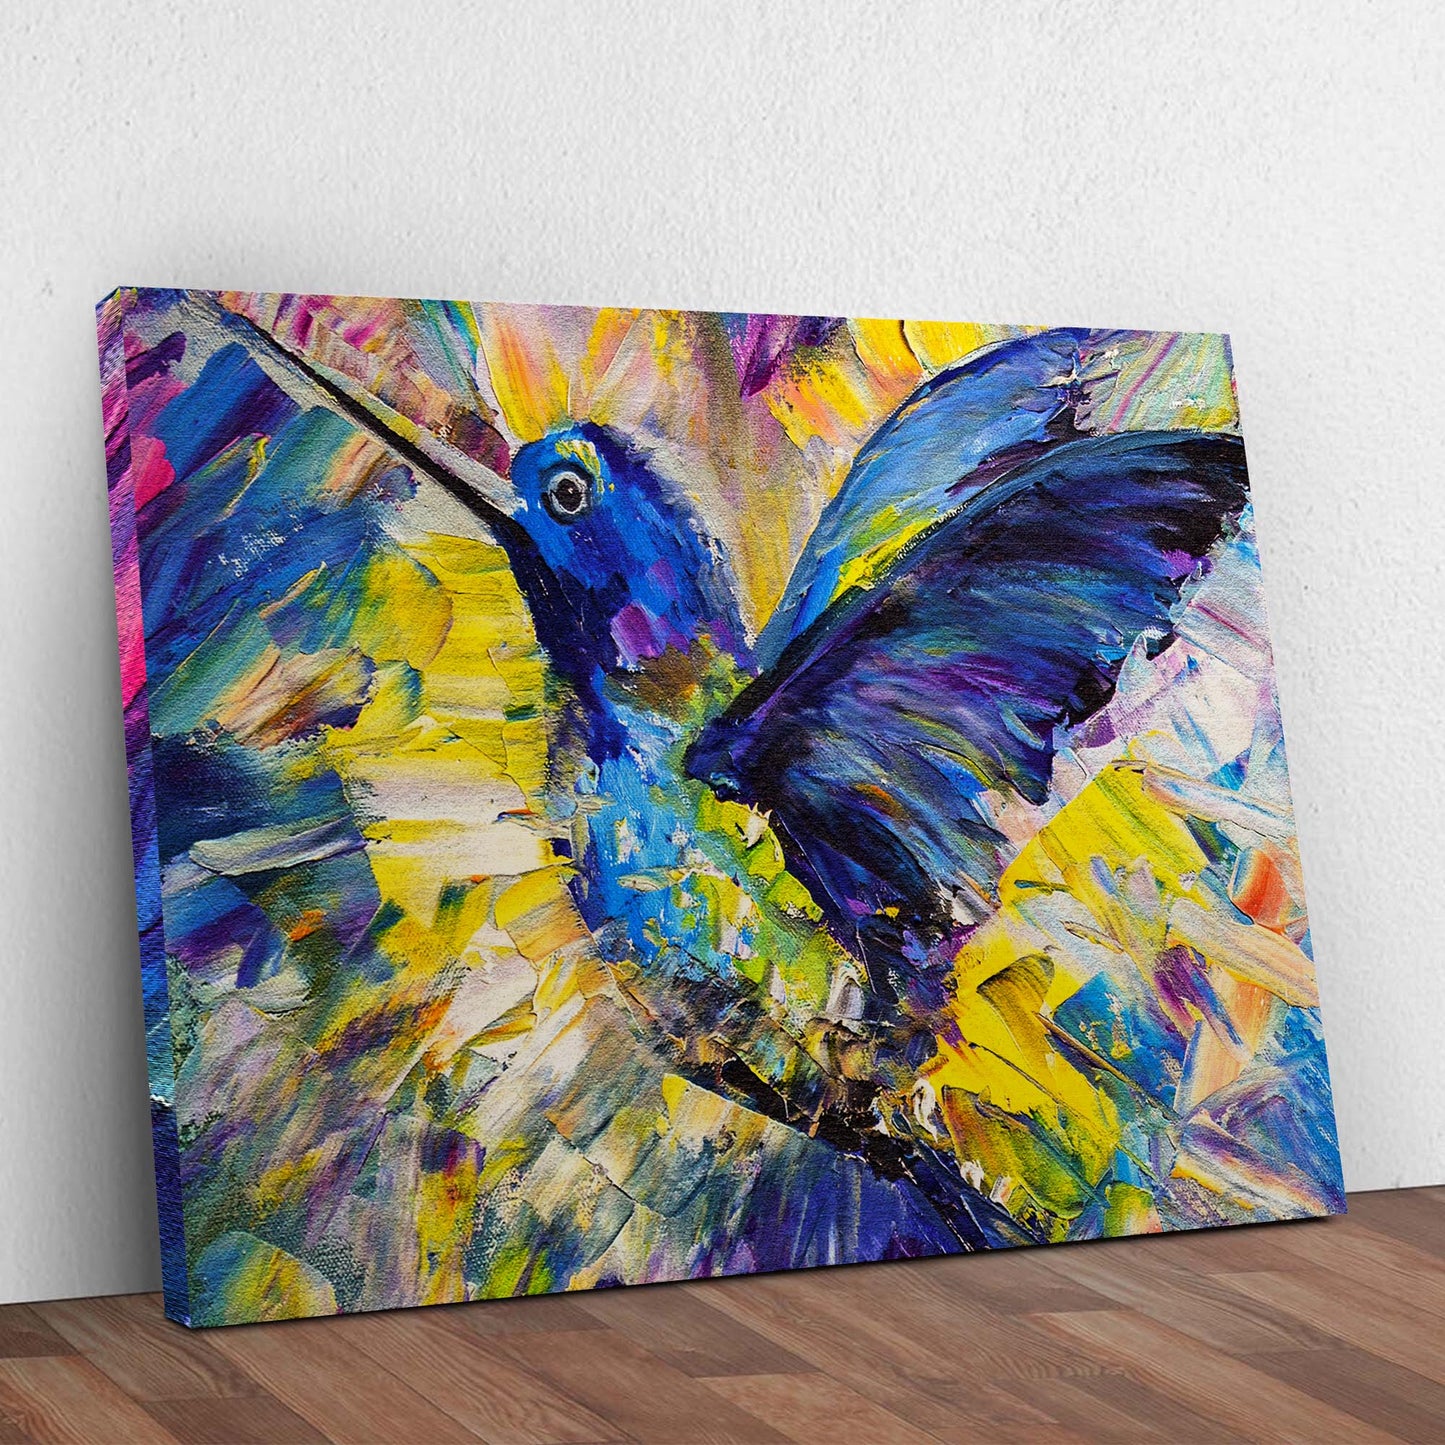 Hummingbird Abstract Canvas Wall Art Style 2 - Image by Tailored Canvases